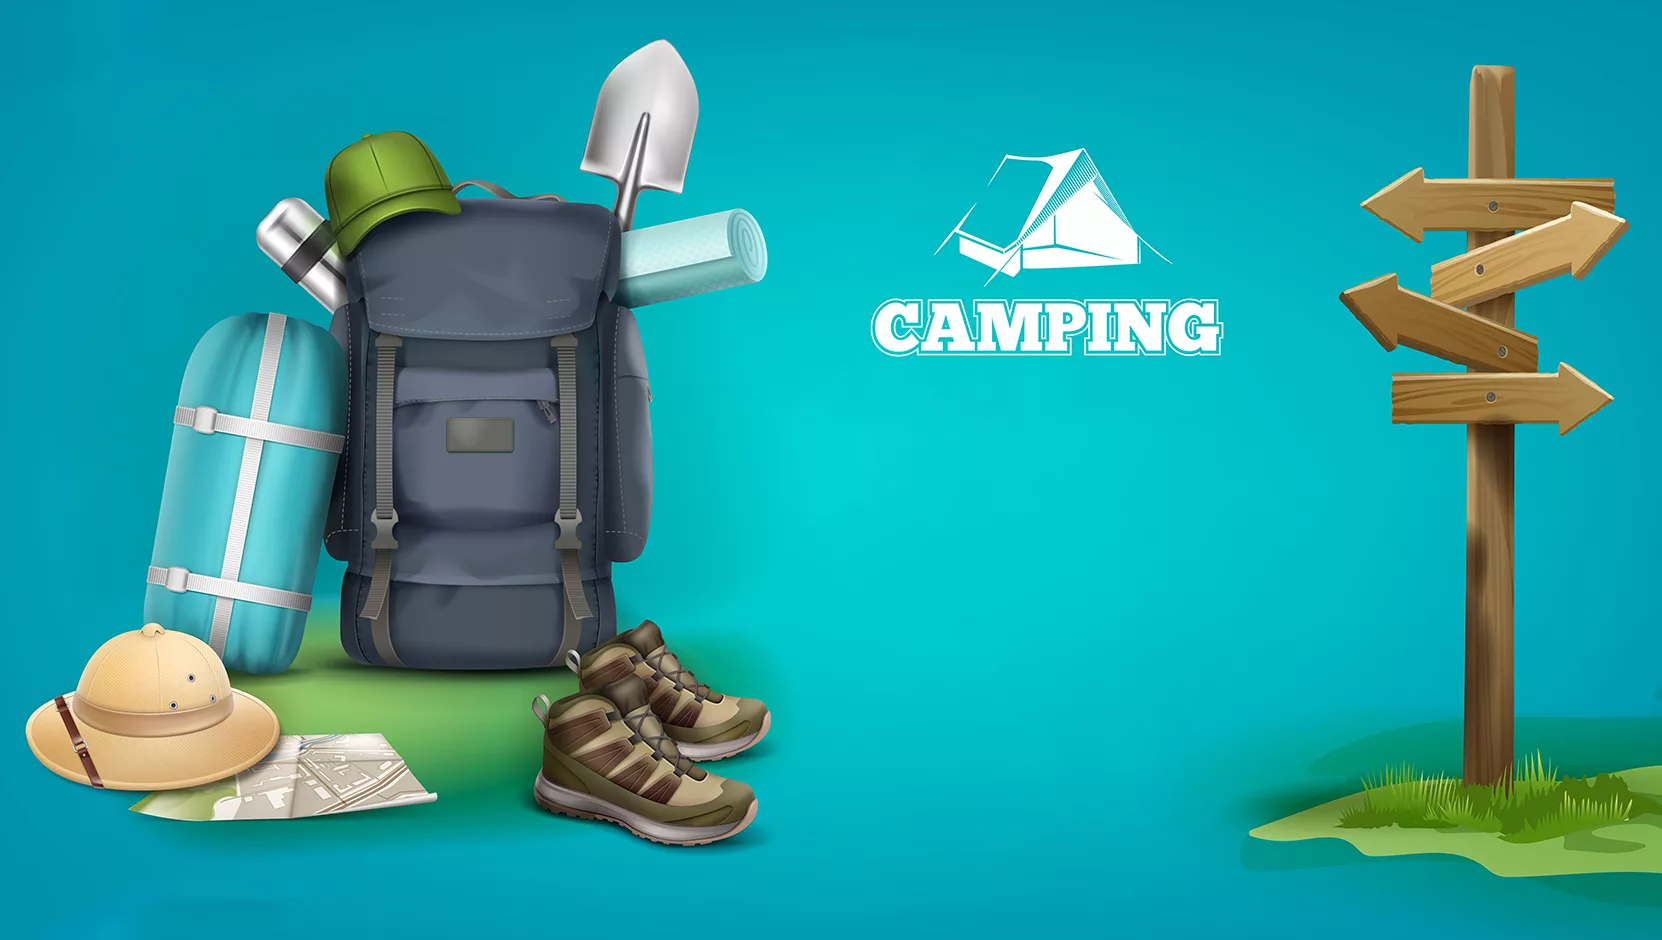 Optimize your outdoor experience with essential gear, knowledge, and a commitment to stay safe.